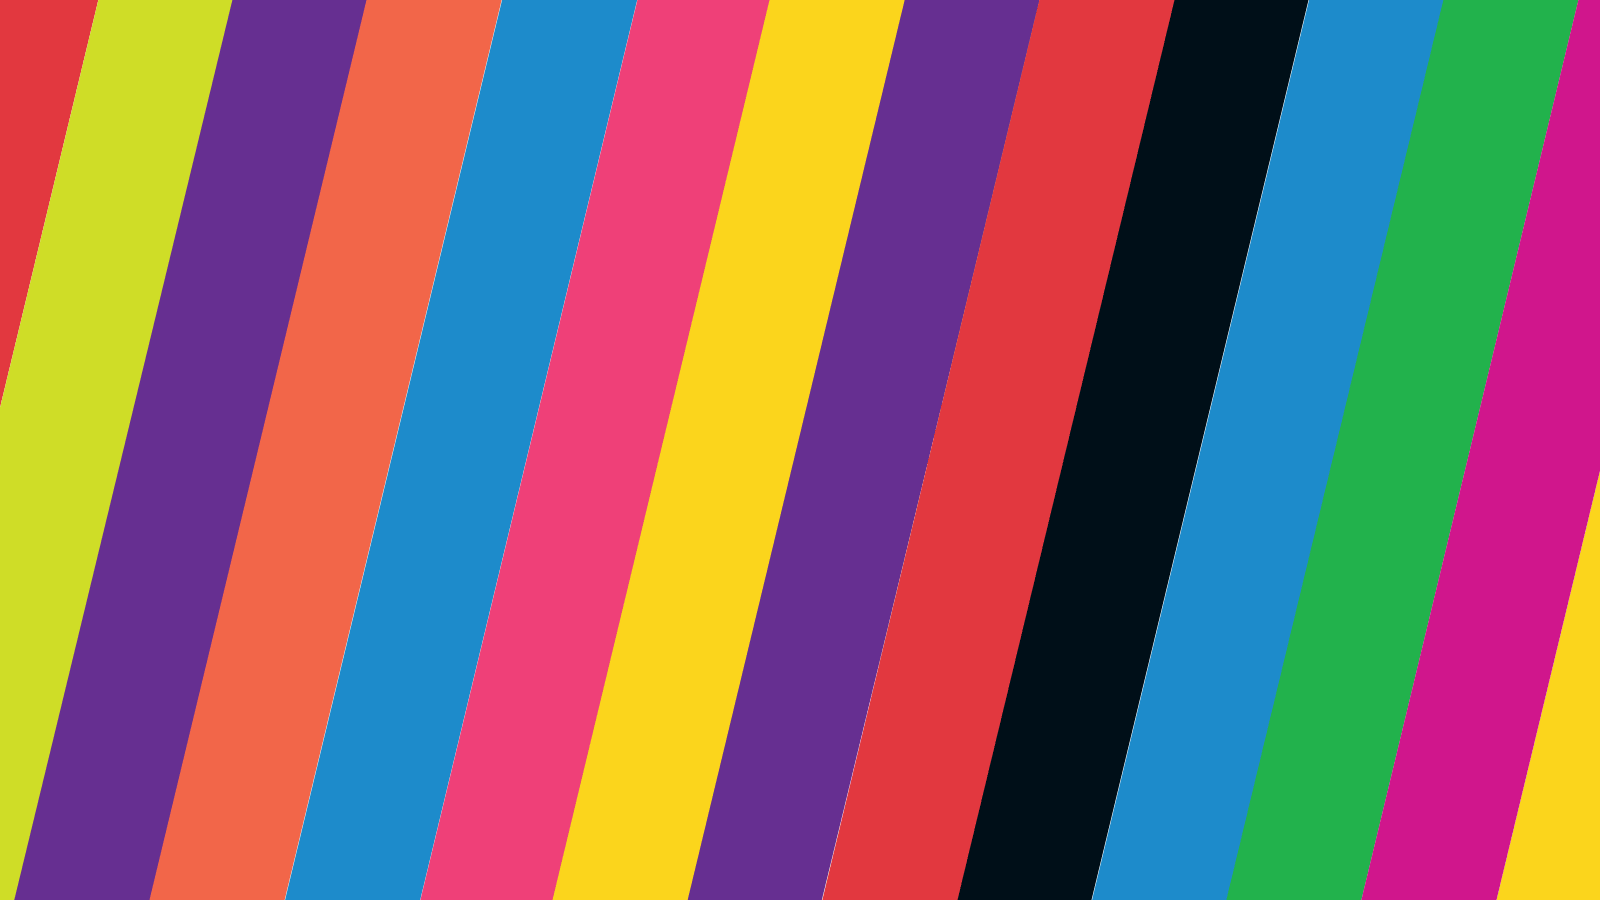 Multi-color stripes that reveal Year in Review.